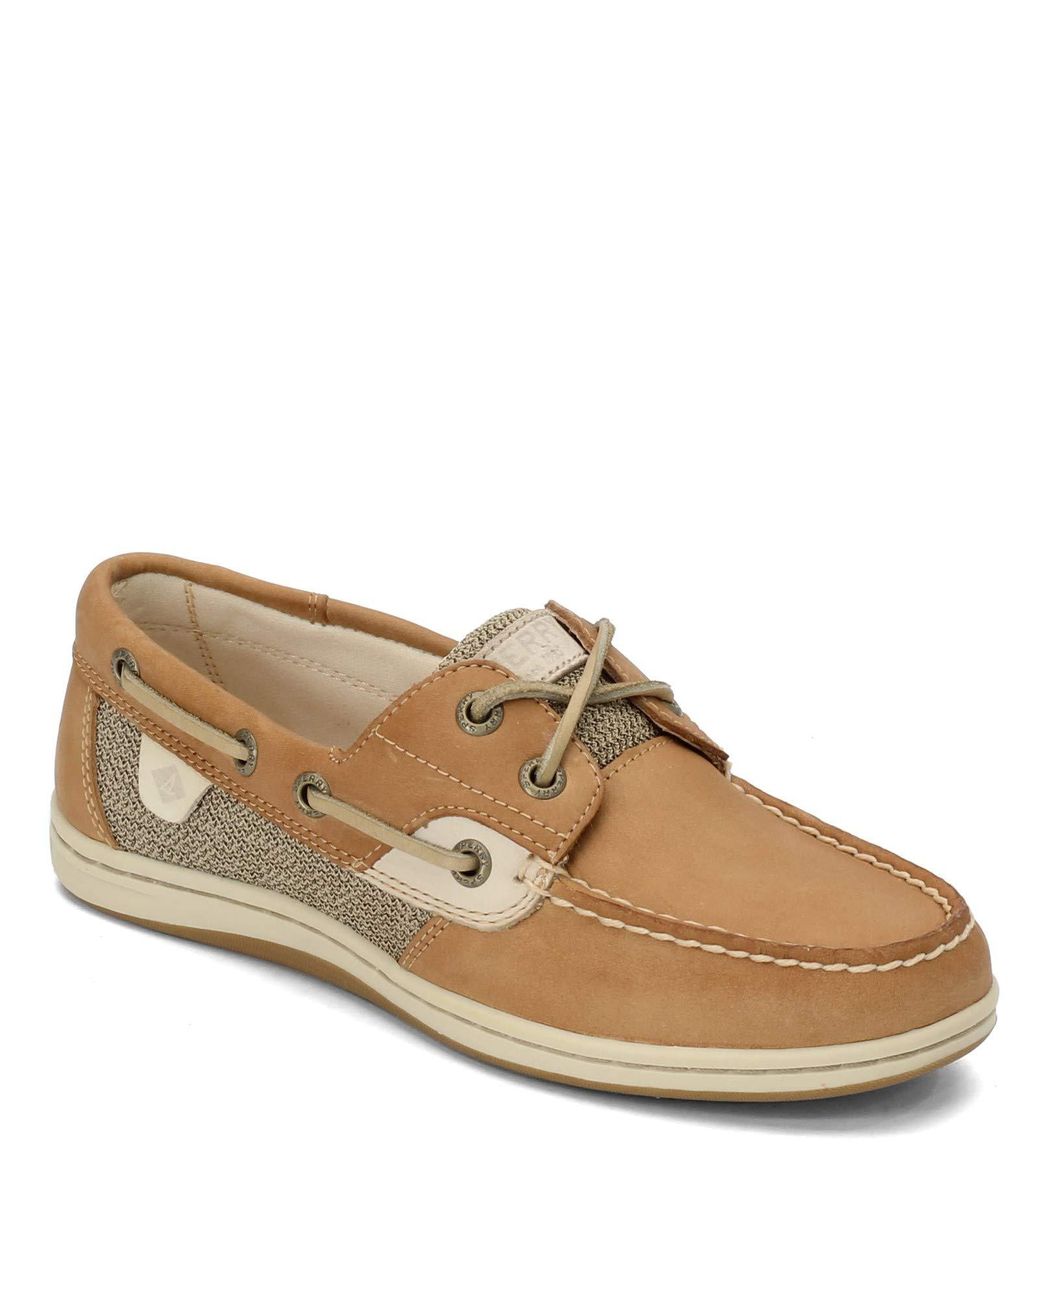 Sperry Top-Sider Rubber Womens Koifish Boat Shoe in Brown - Save 12% - Lyst